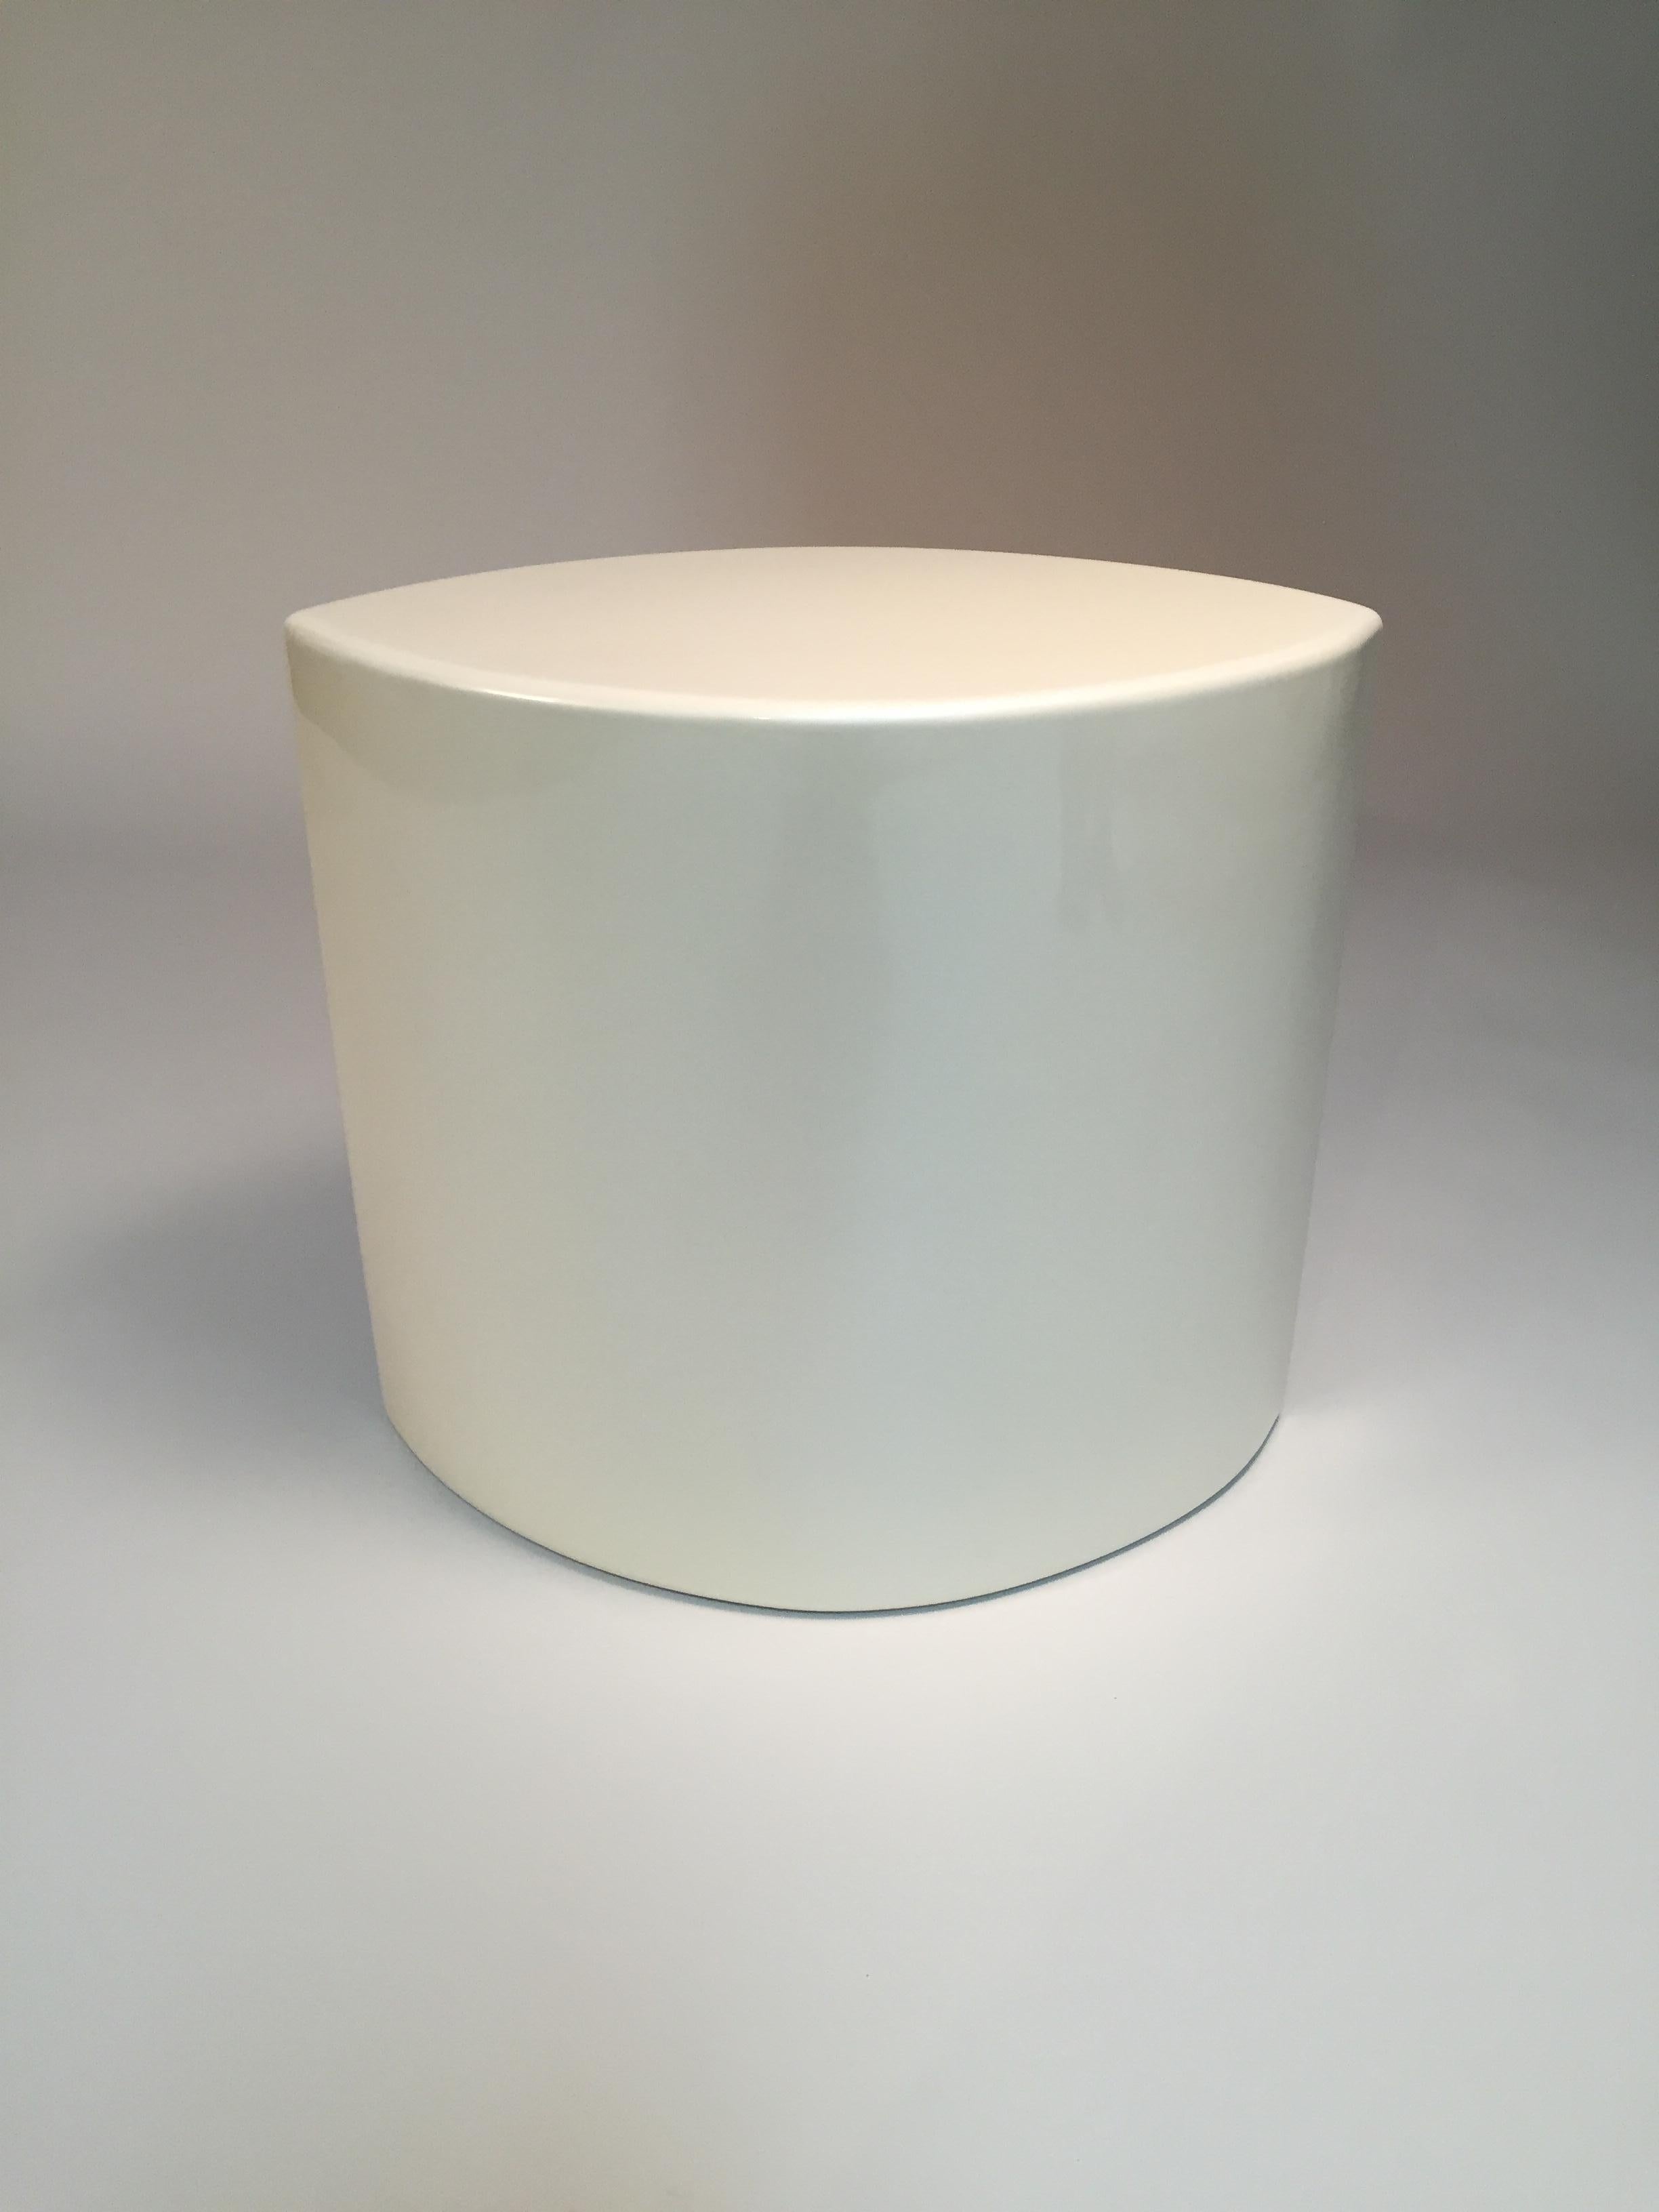 White Lacquer Pearlescent Gloss Side Table or Seat In Excellent Condition For Sale In Daly City, CA